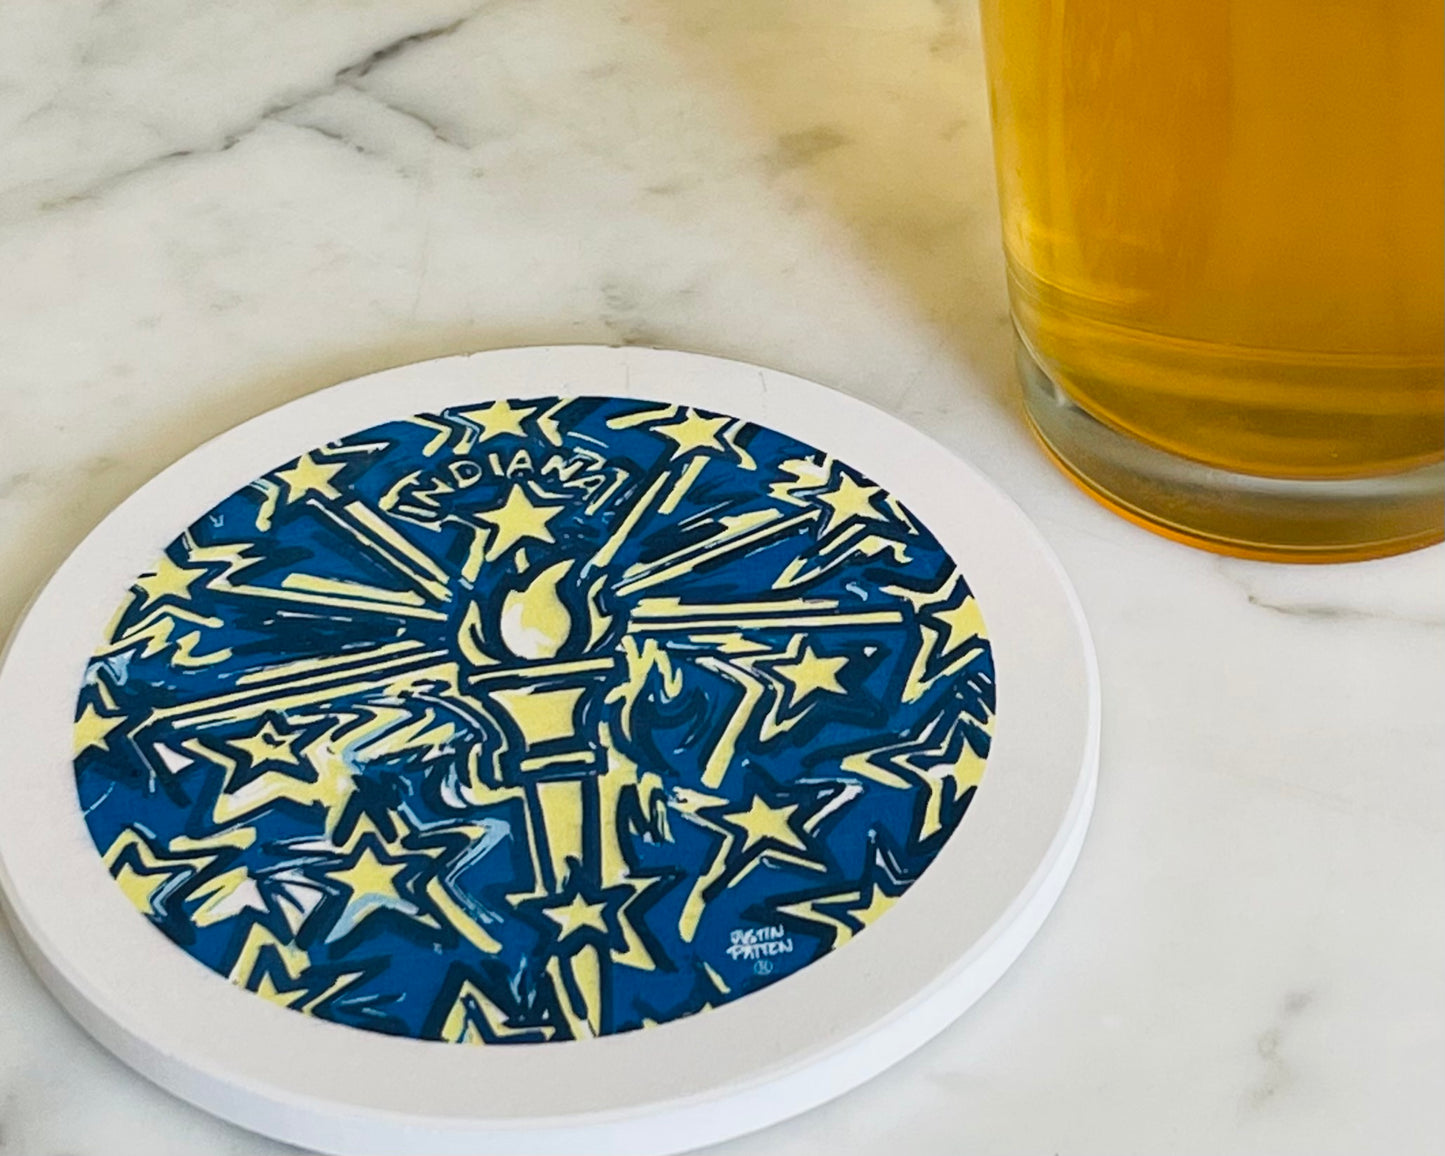 Indiana Flag Stone Coaster by Justin Patten